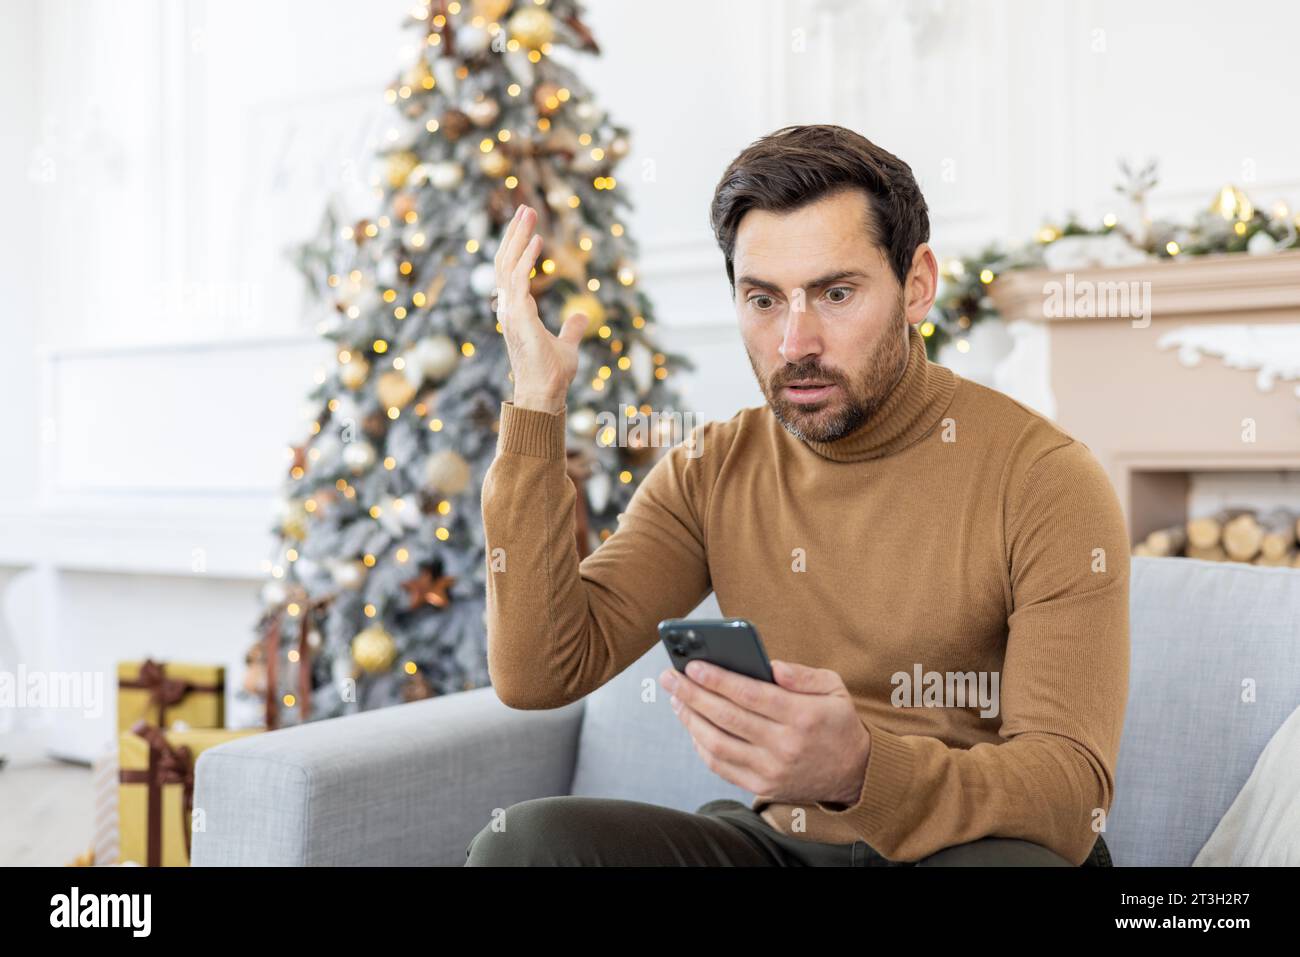 Shocked young man looking at phone screen and reading bad news, sitting at home on sofa near Christmas tree on holidays and gesturing angrily with hands. Stock Photo